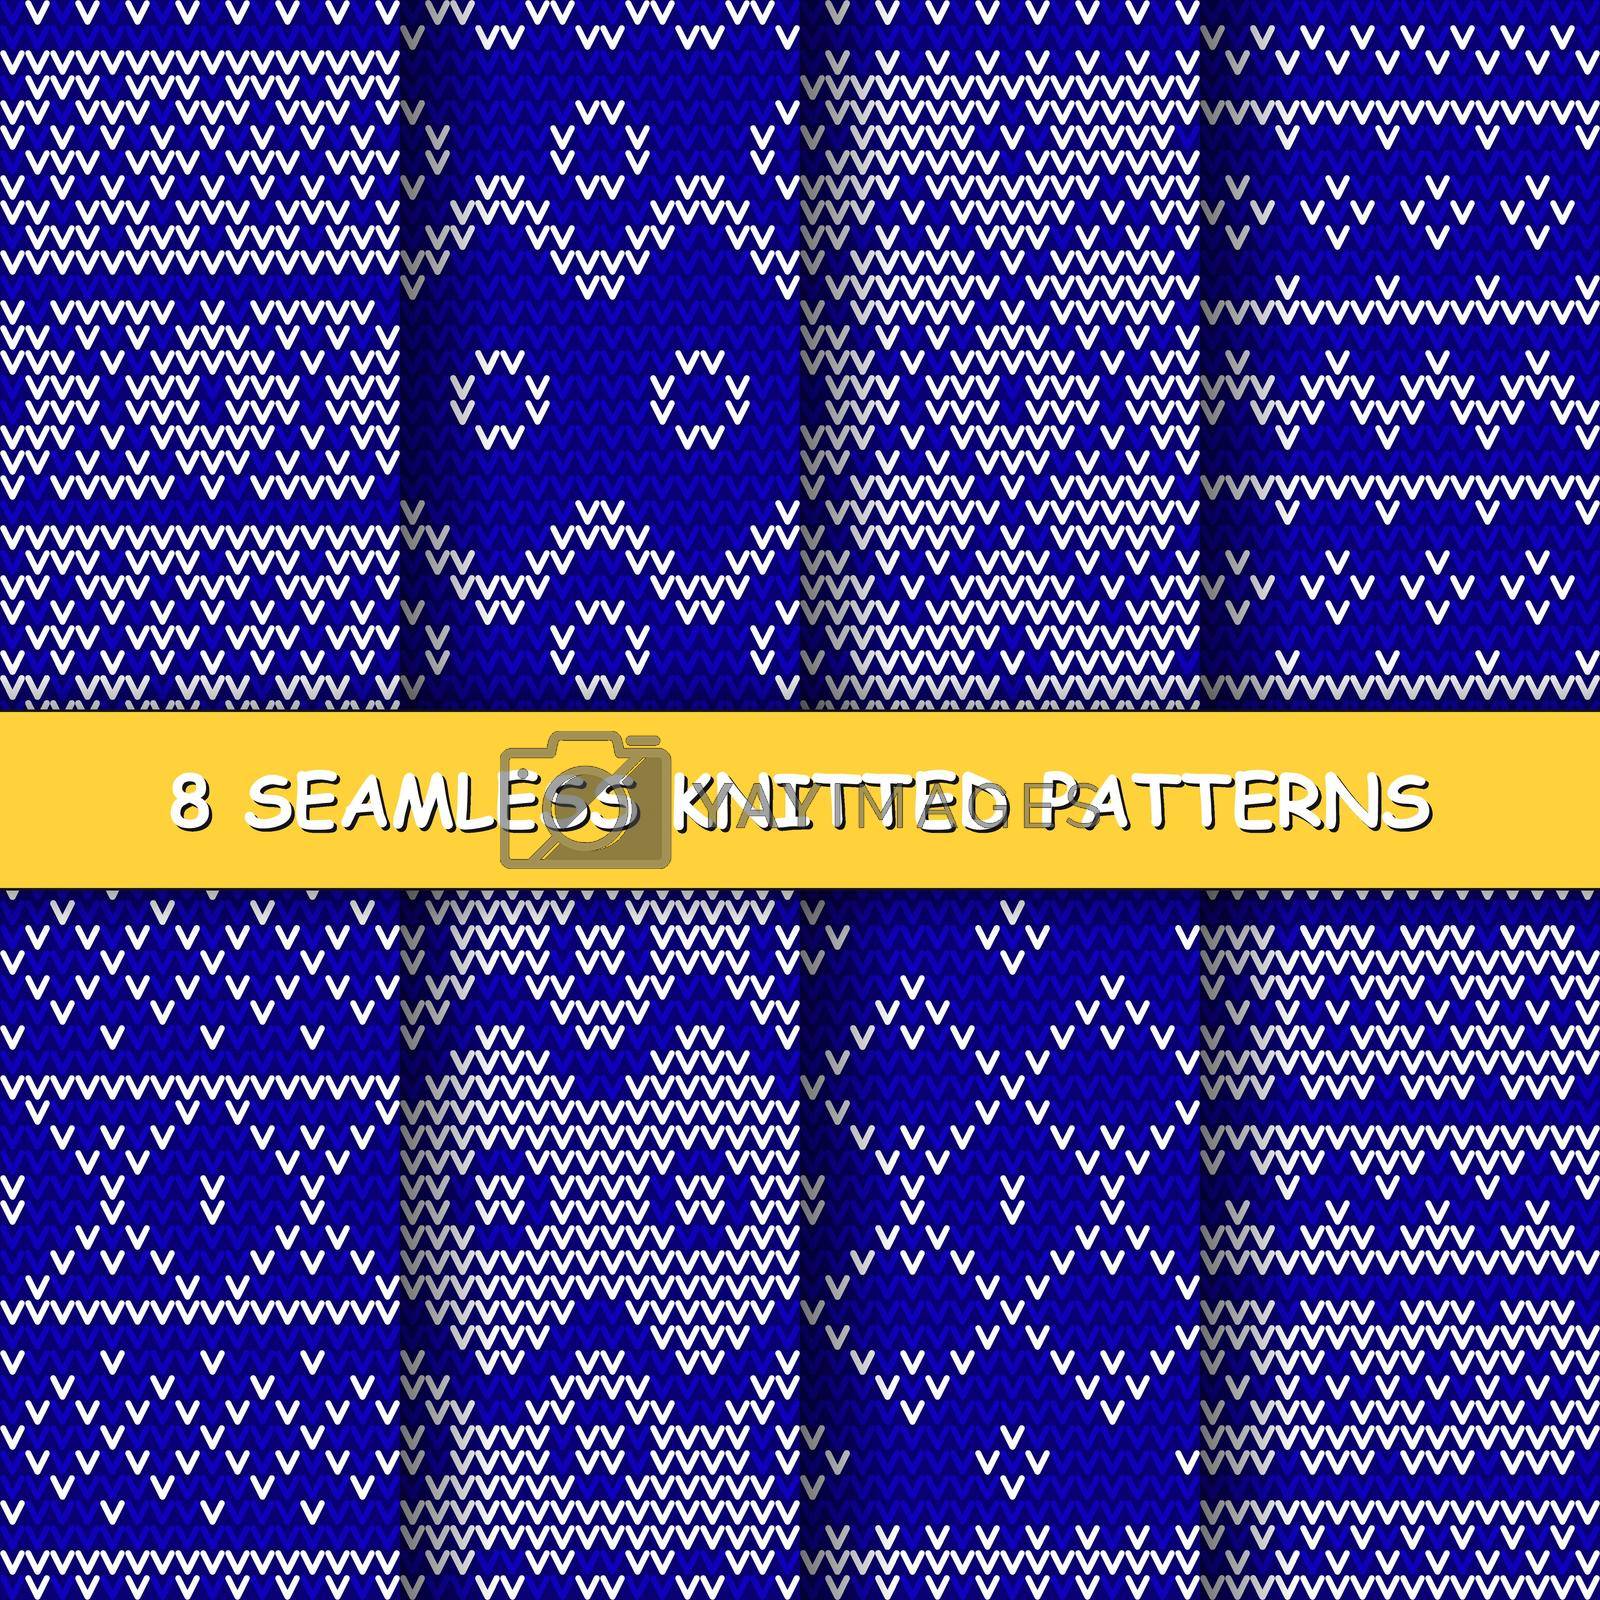 Set with seamless winter patterns. Blue and white knitted christmas backgrounds in scandinavian style. Vector